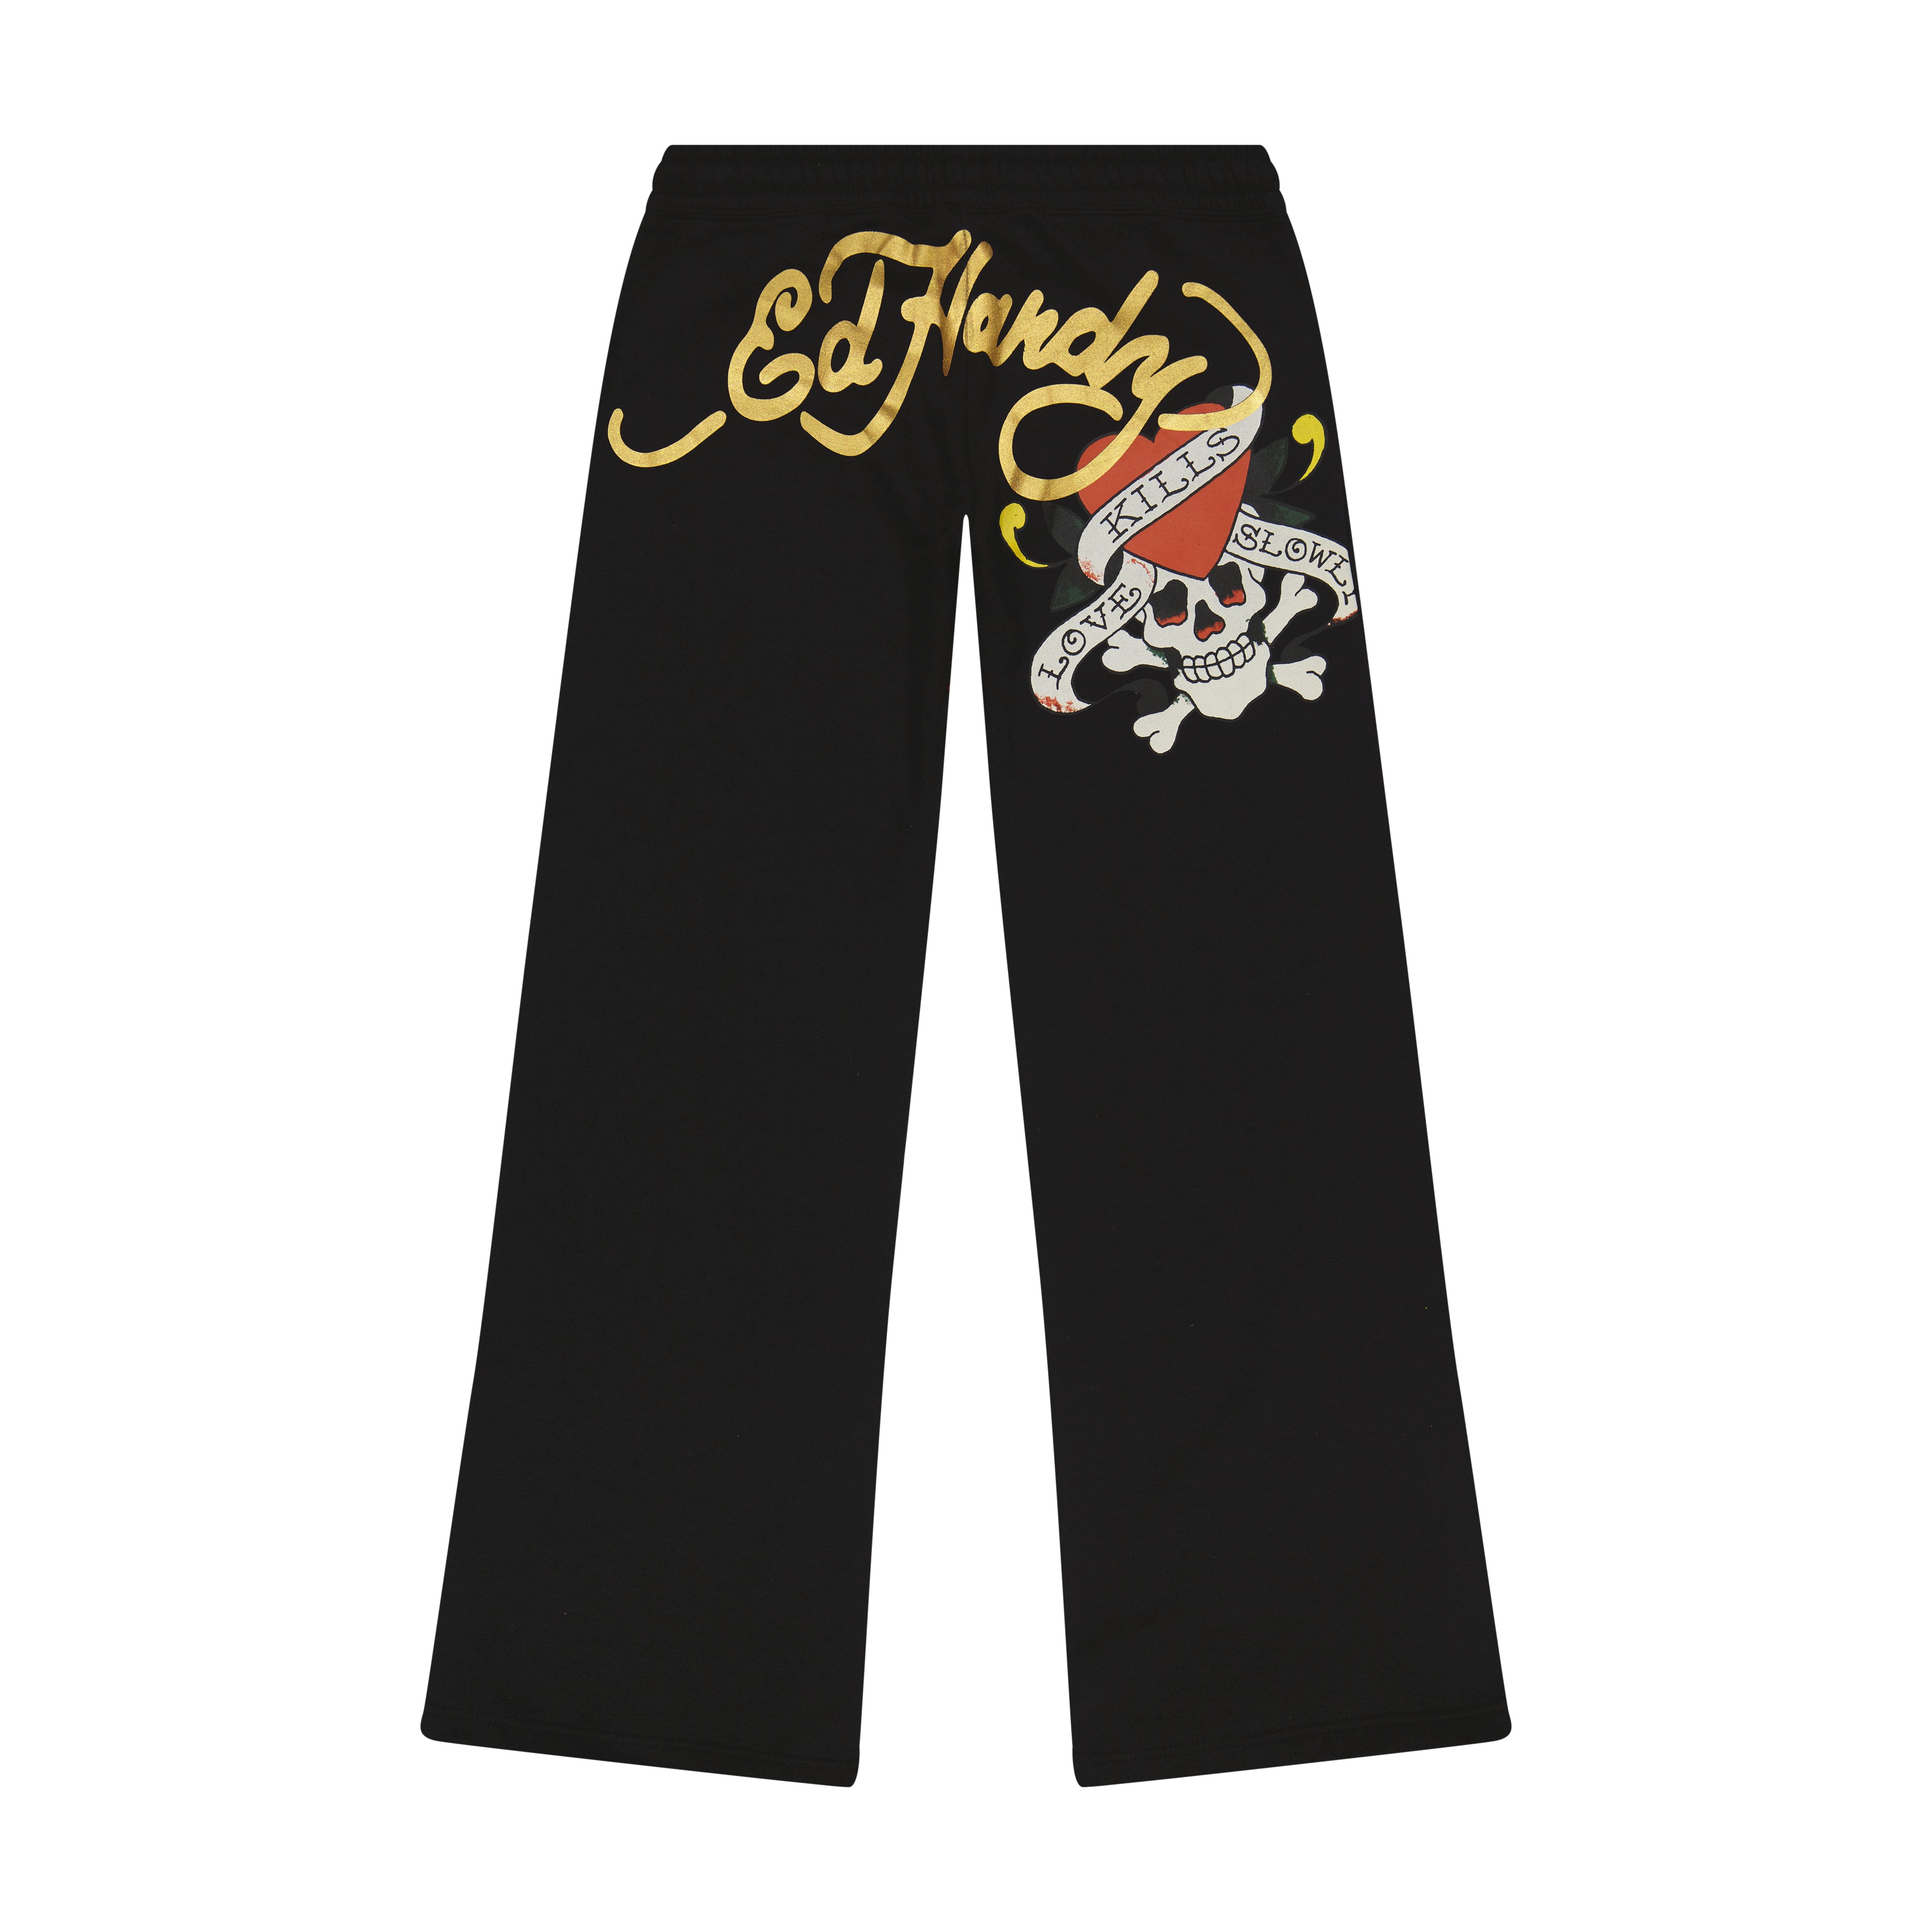 Vintage Deadstock Early 2000s Black Ed Hardy Bottoms / Ed Hardy Lounge  Pants / Ed Hardy Joggers Sizes Available 